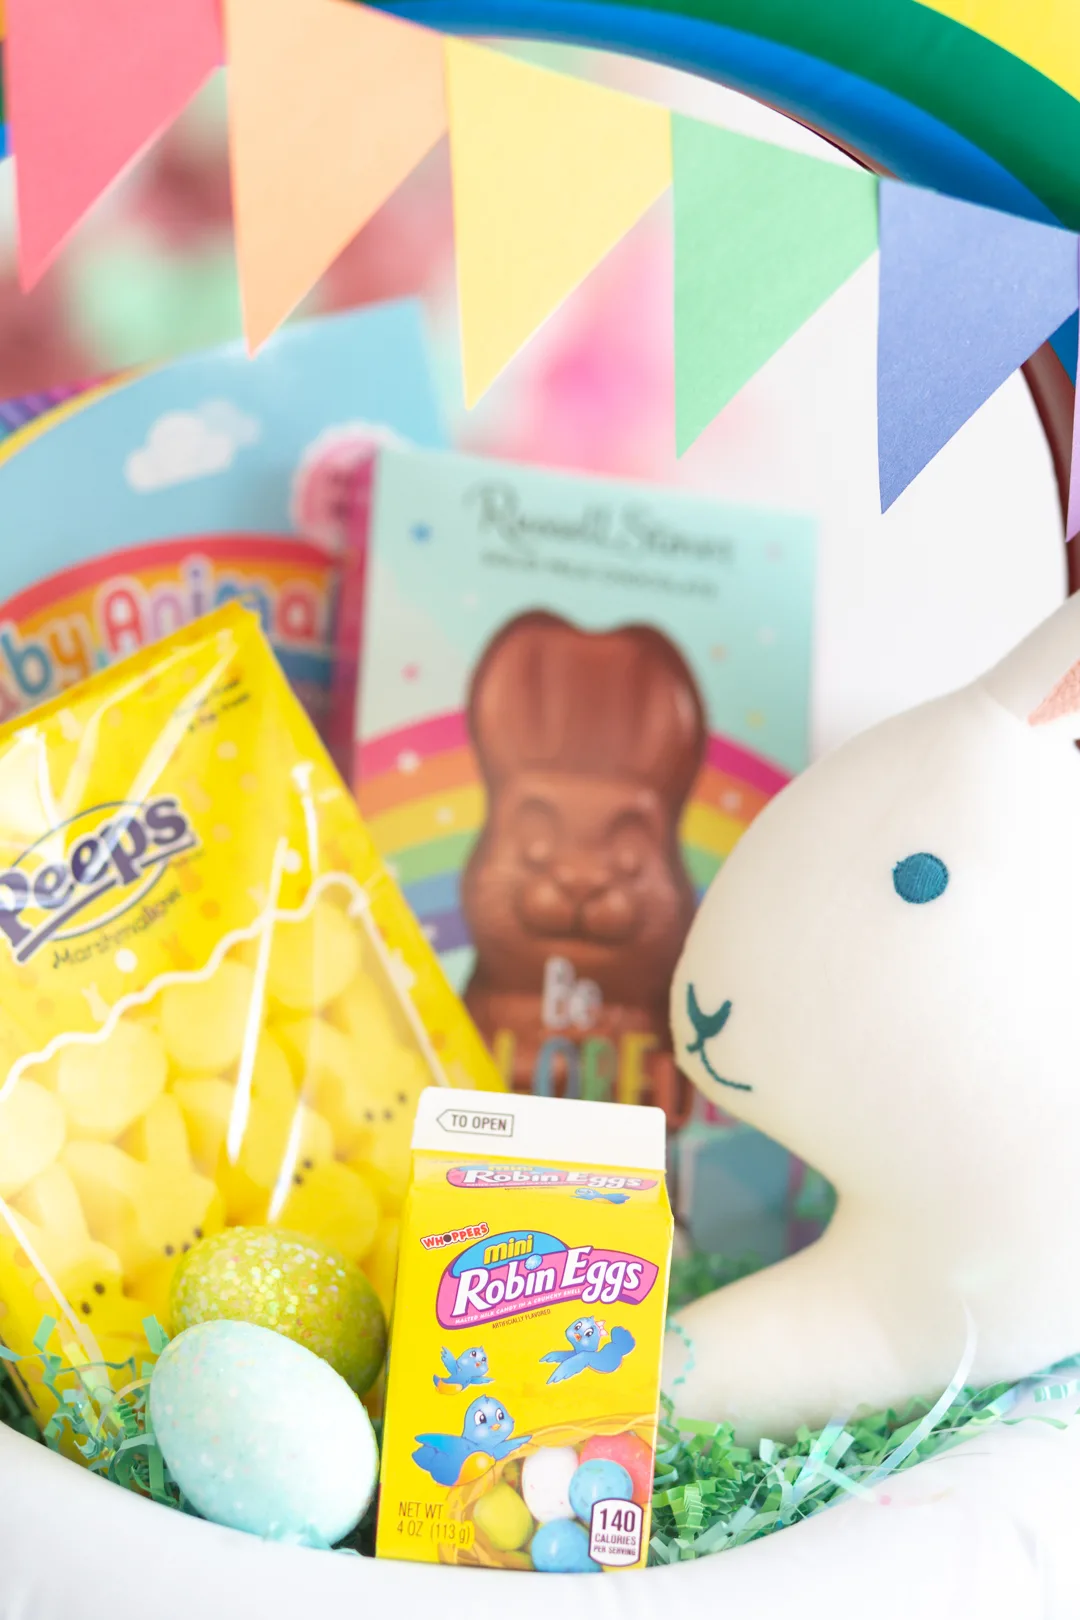 up close view of easter basket fillers including robin's eggs, yellow peeps bunnies, chocolate bunny and stuffed bunny pillow. Rainbow pendent banner made with construction paper.